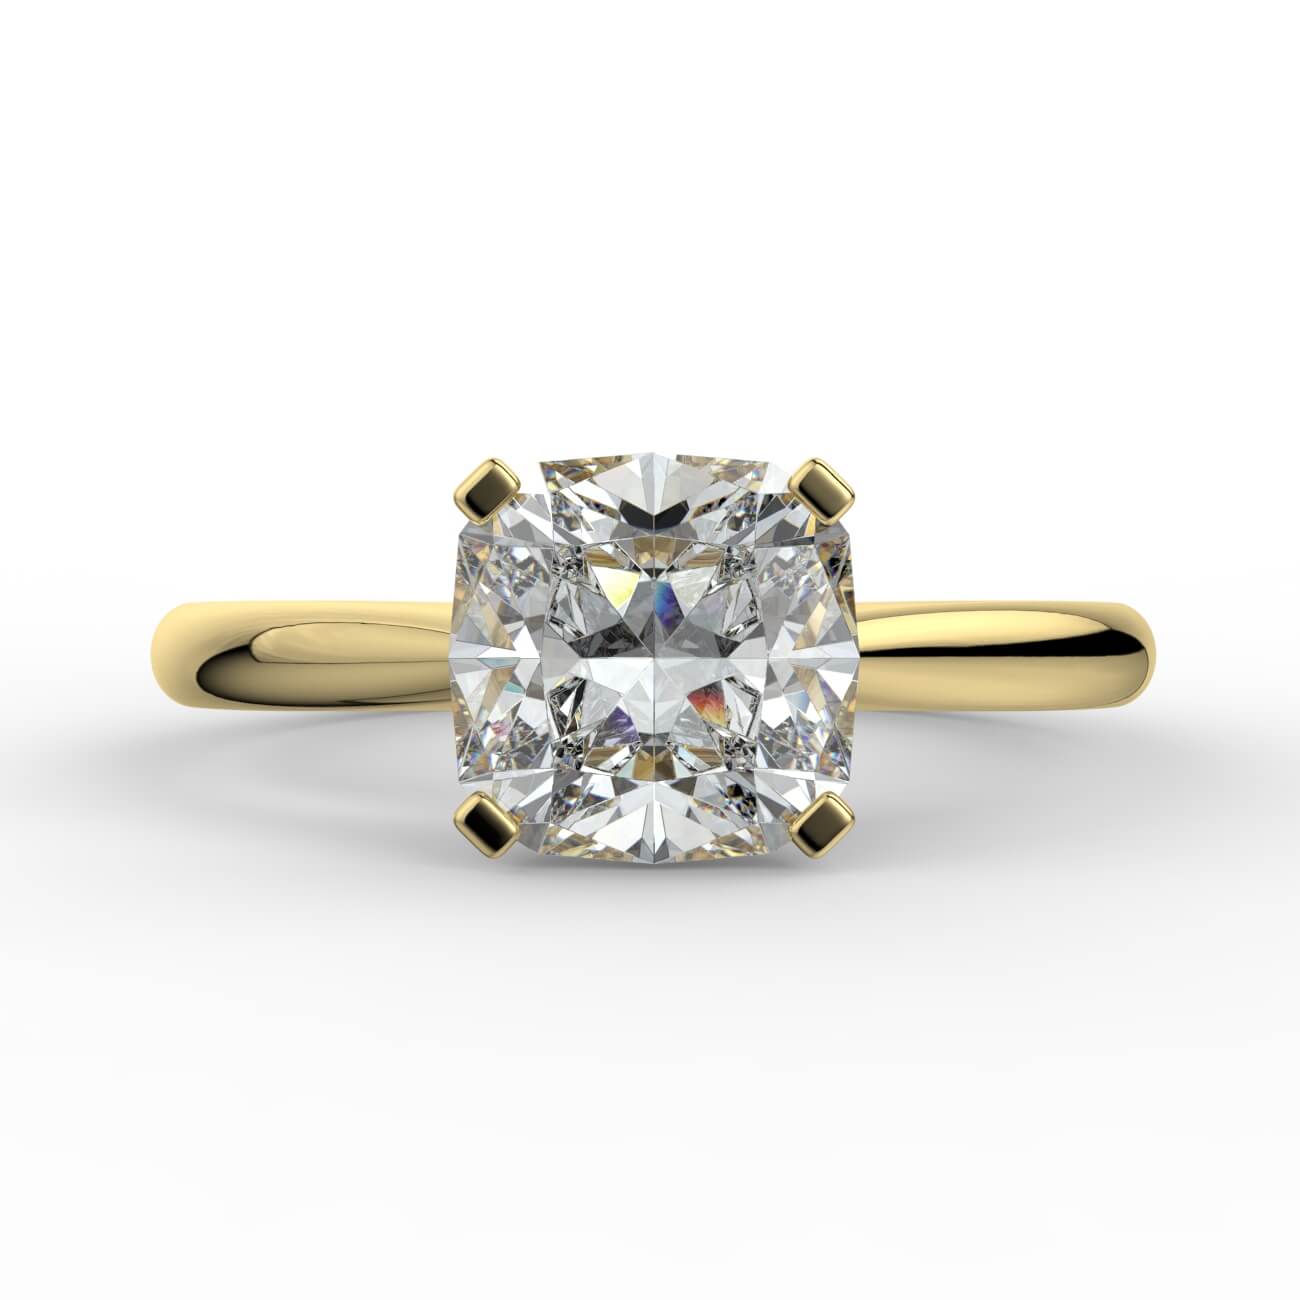 Cushion cut diamond cathedral engagement ring in yellow gold – Australian Diamond Network